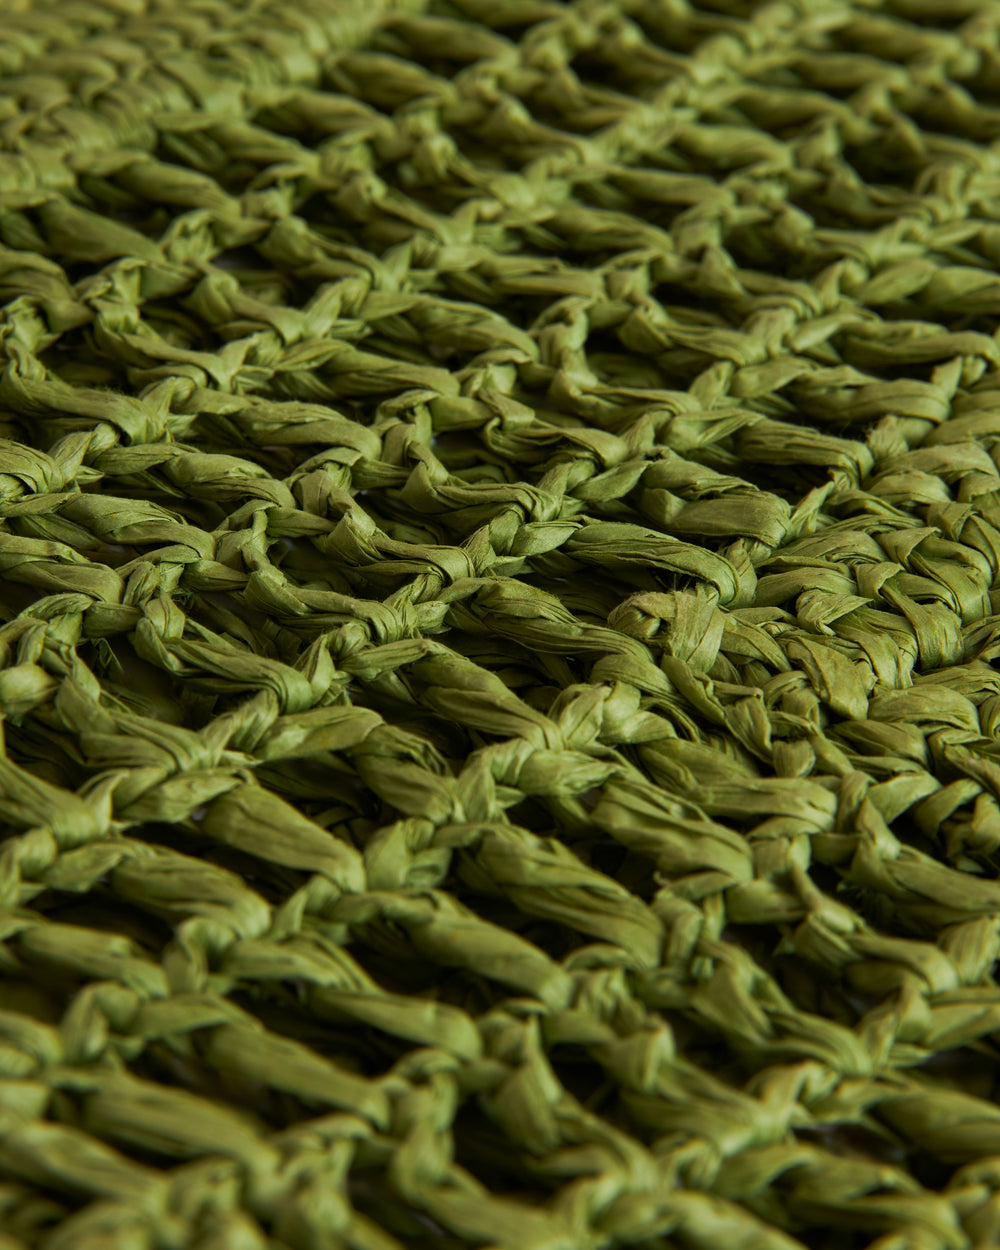 Close-up view of a textured green woven fabric showing intricate details of the weave pattern, featuring The Amabile Rafia Bag from Dandy Del Mar.